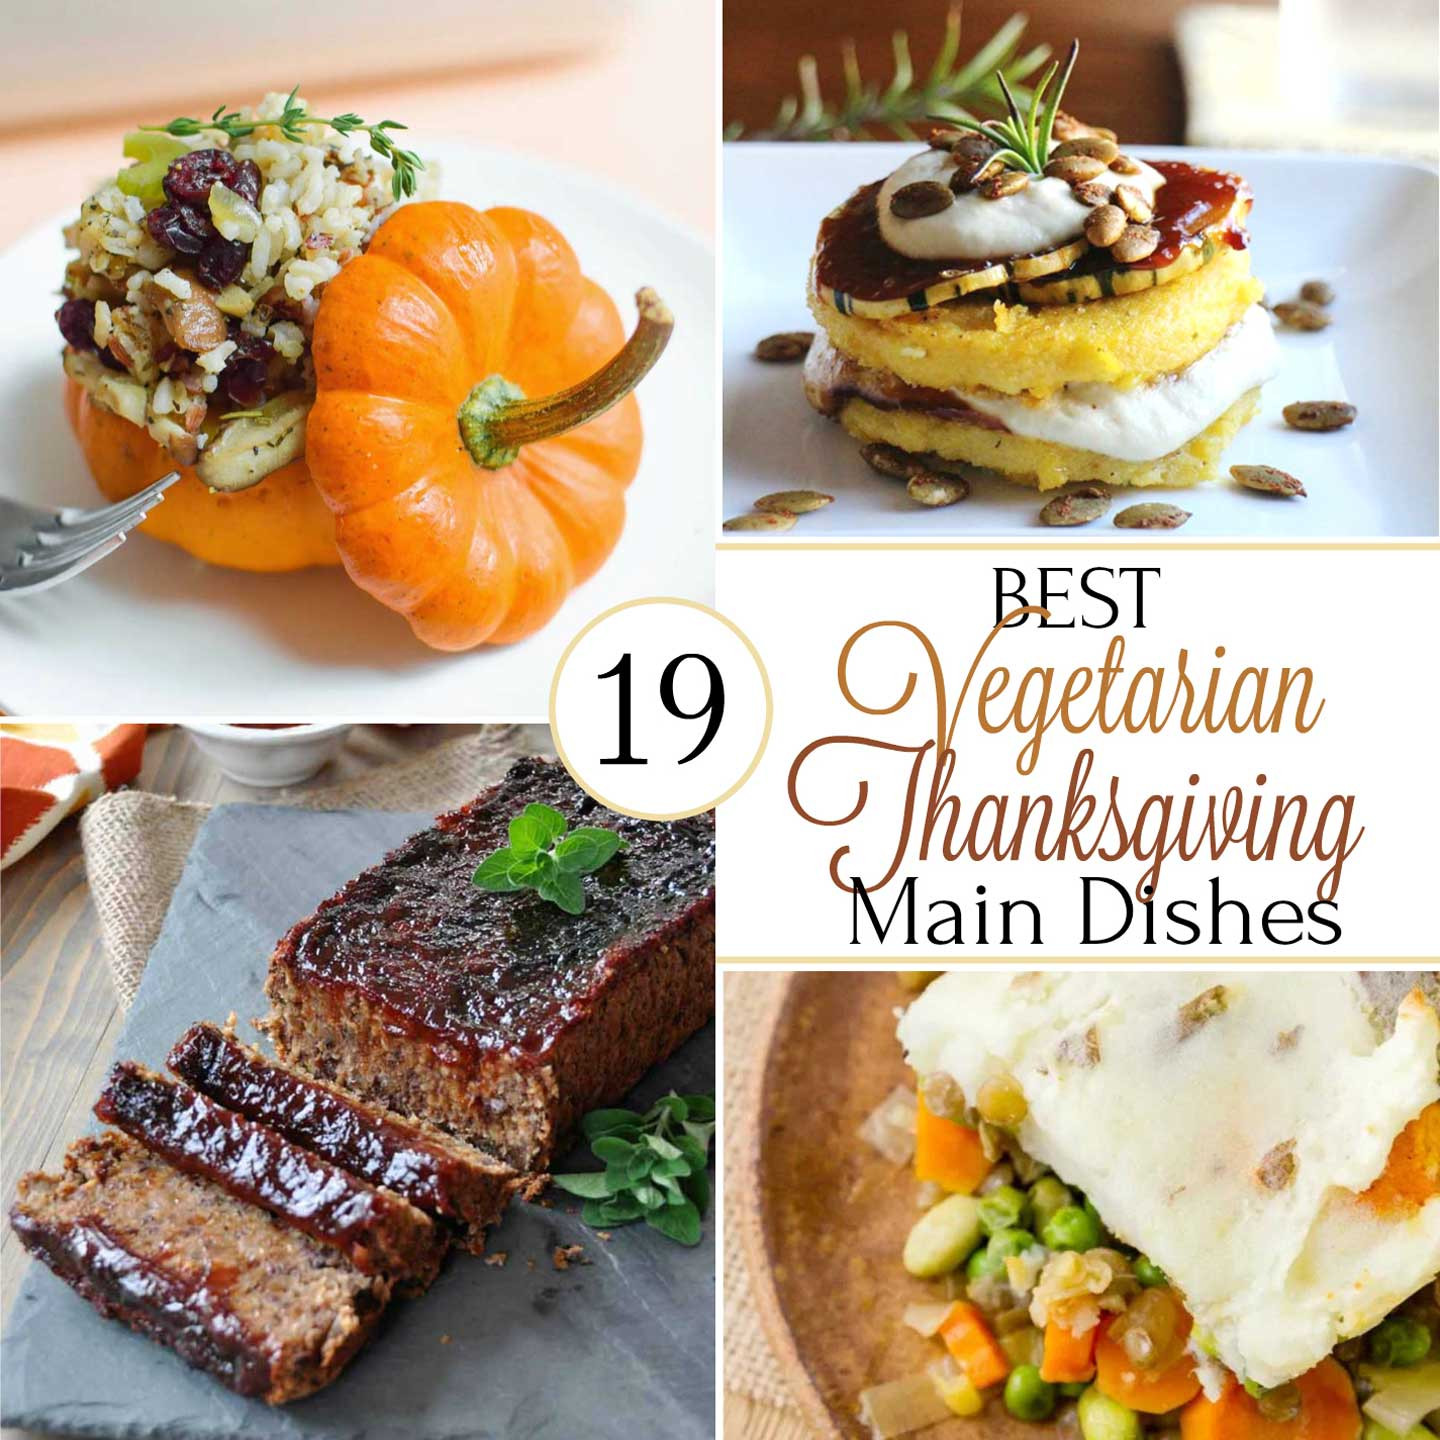 Best Vegetarian Main Dish Recipes
 19 Best Healthy Thanksgiving Ve arian Main Dishes Two